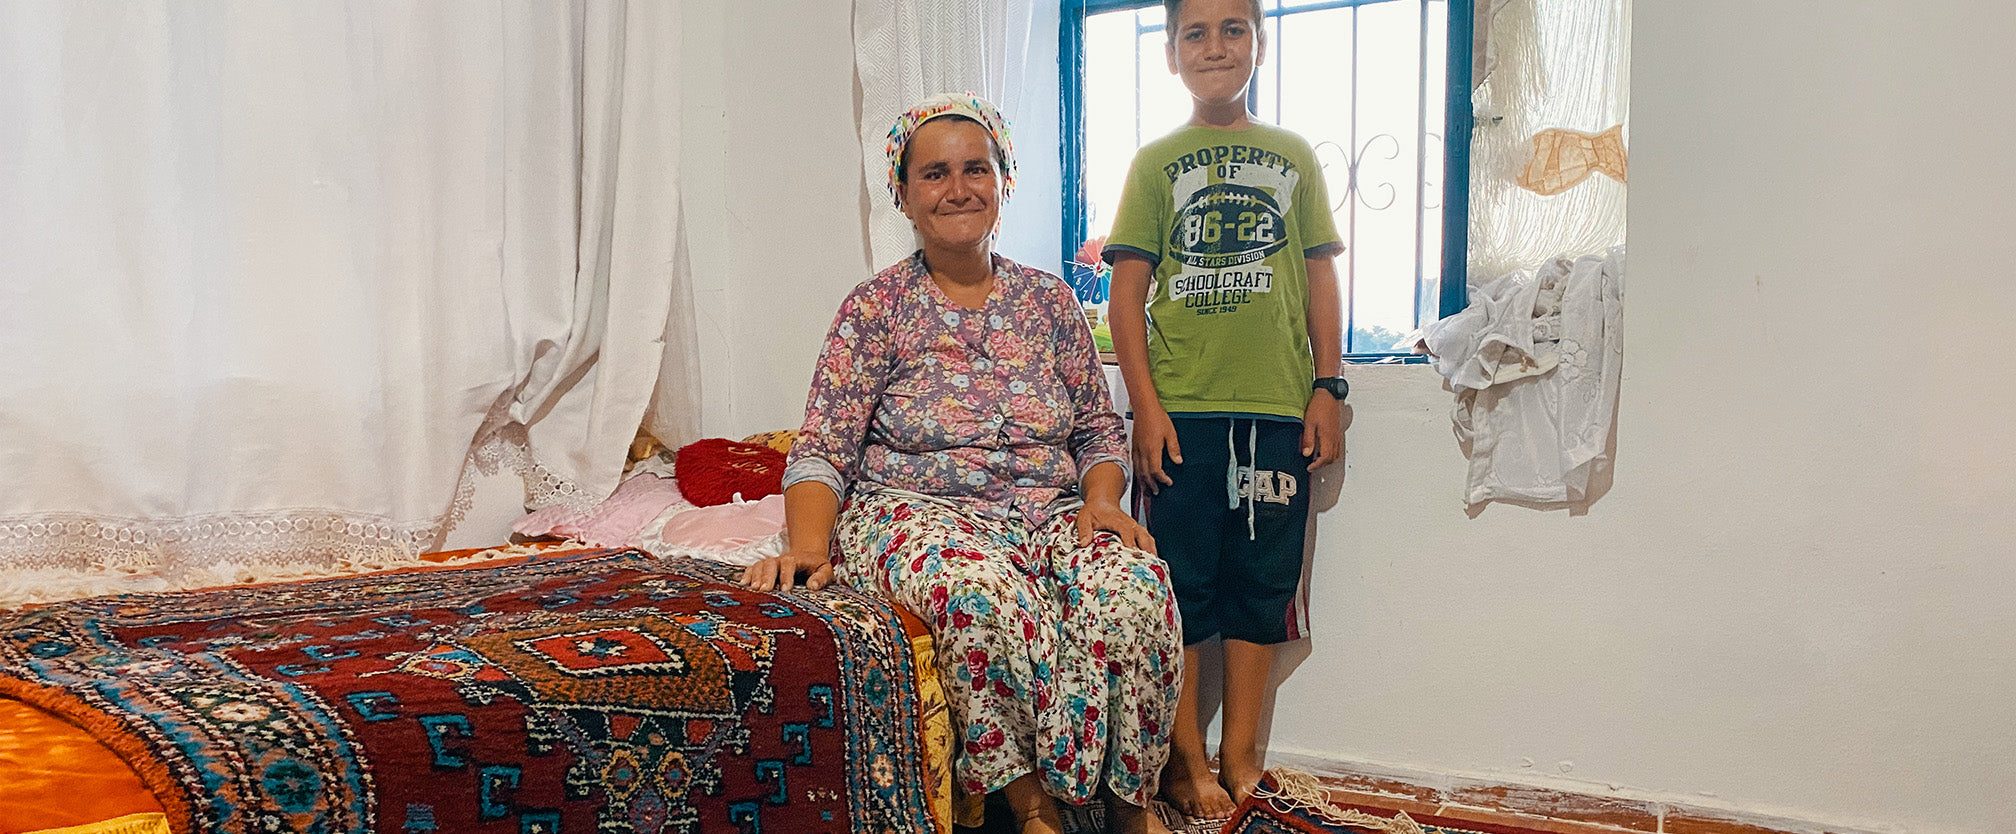 Hatice and his son, showed us her loom, and nestled inside was the most intricate and vibrant rug. She was in the process of hand-weaving it together, between looking after her family and farm.